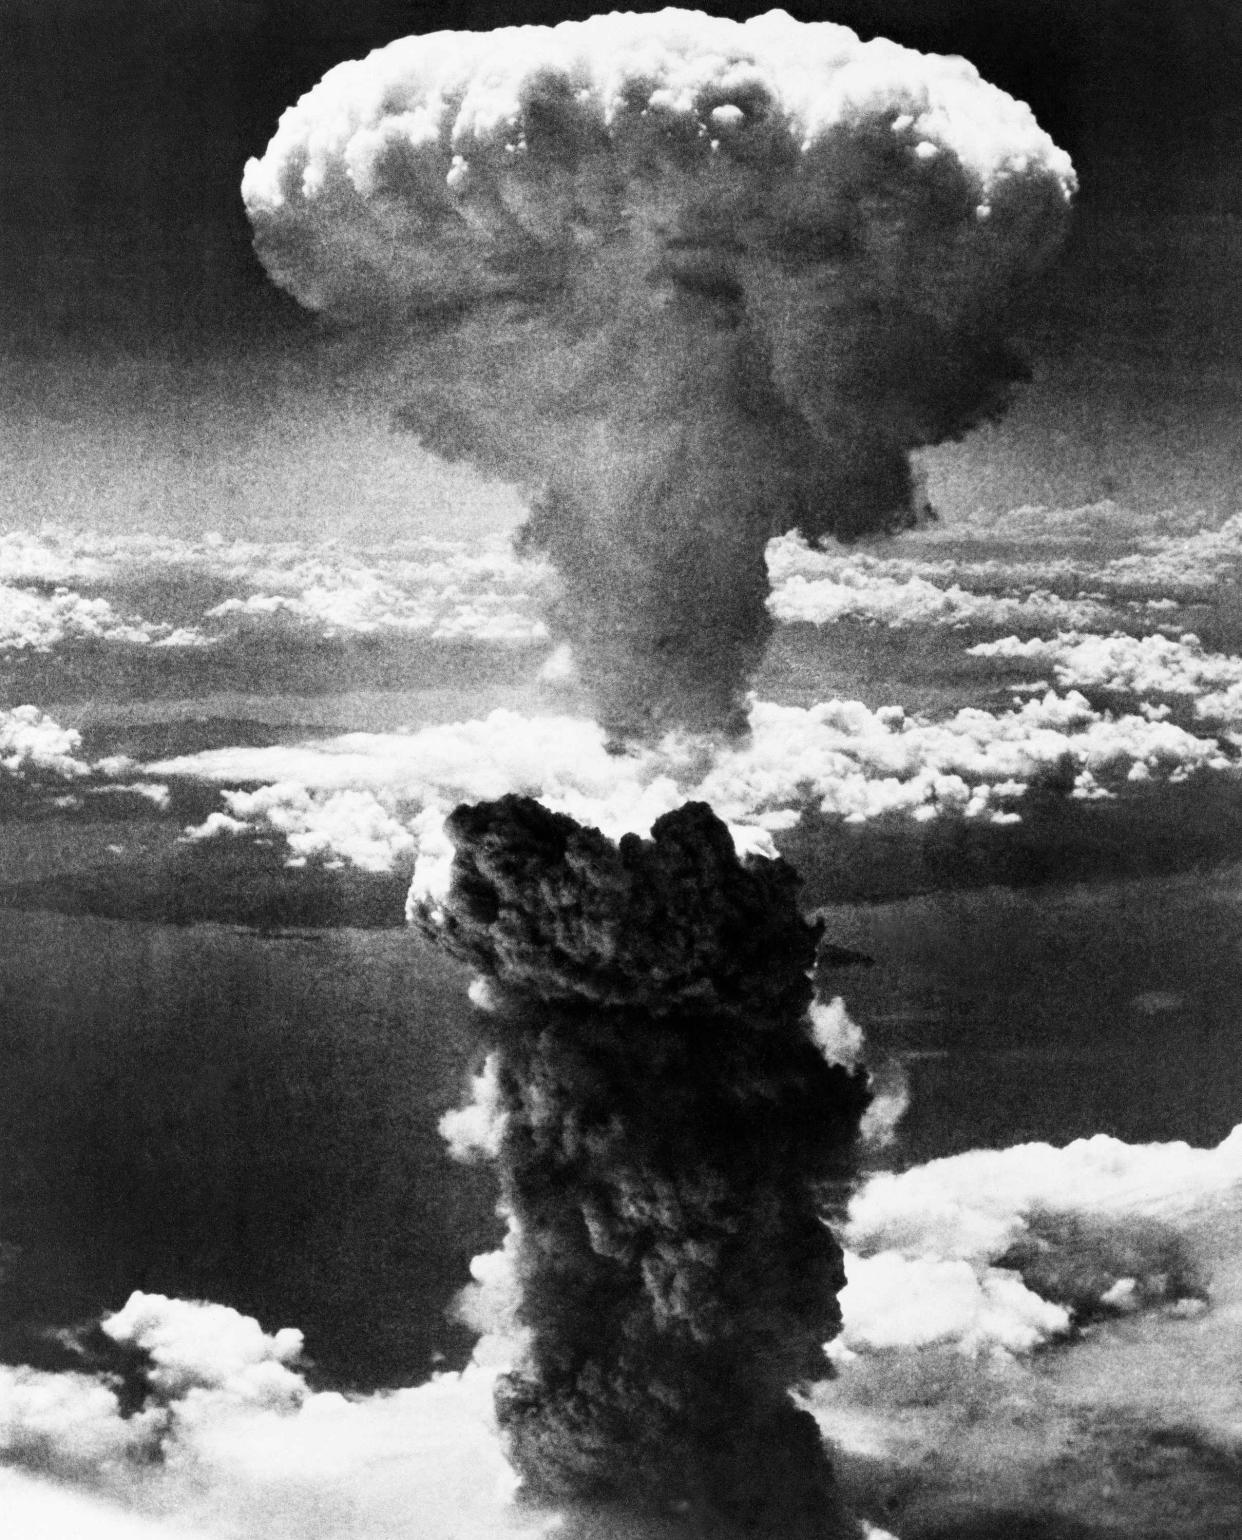 In this Aug. 9, 1945 file photo, a mushroom cloud rises moments after the atomic bomb was dropped on Nagasaki, southern Japan. On two days in August 1945, U.S. planes dropped two atomic bombs, one on Hiroshima, one on Nagasaki, the first and only time nuclear weapons have been used in combat. Their destructive power was unprecedented, incinerating buildings and people, and leaving lifelong scars on survivors, not just physical but also psychological, and on the cities themselves. Days later, World War II was over.